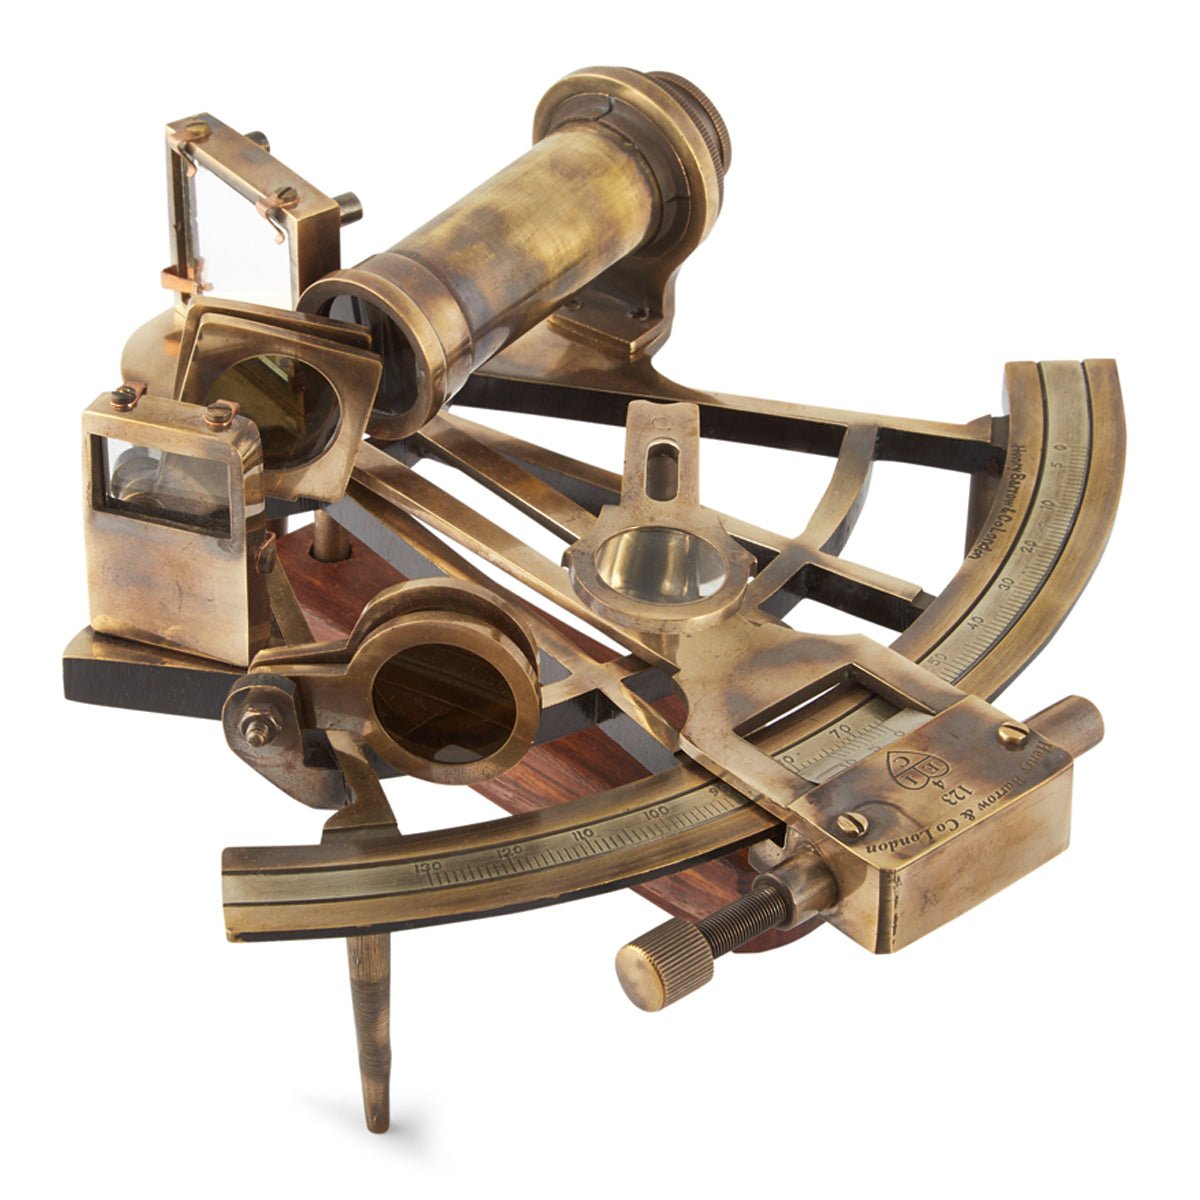 MALL INC. Sextant, Brass Hand-Made 9 Sextant, Nautical Working Sextant, Marine NAVIGATIONAL Ship Instrument